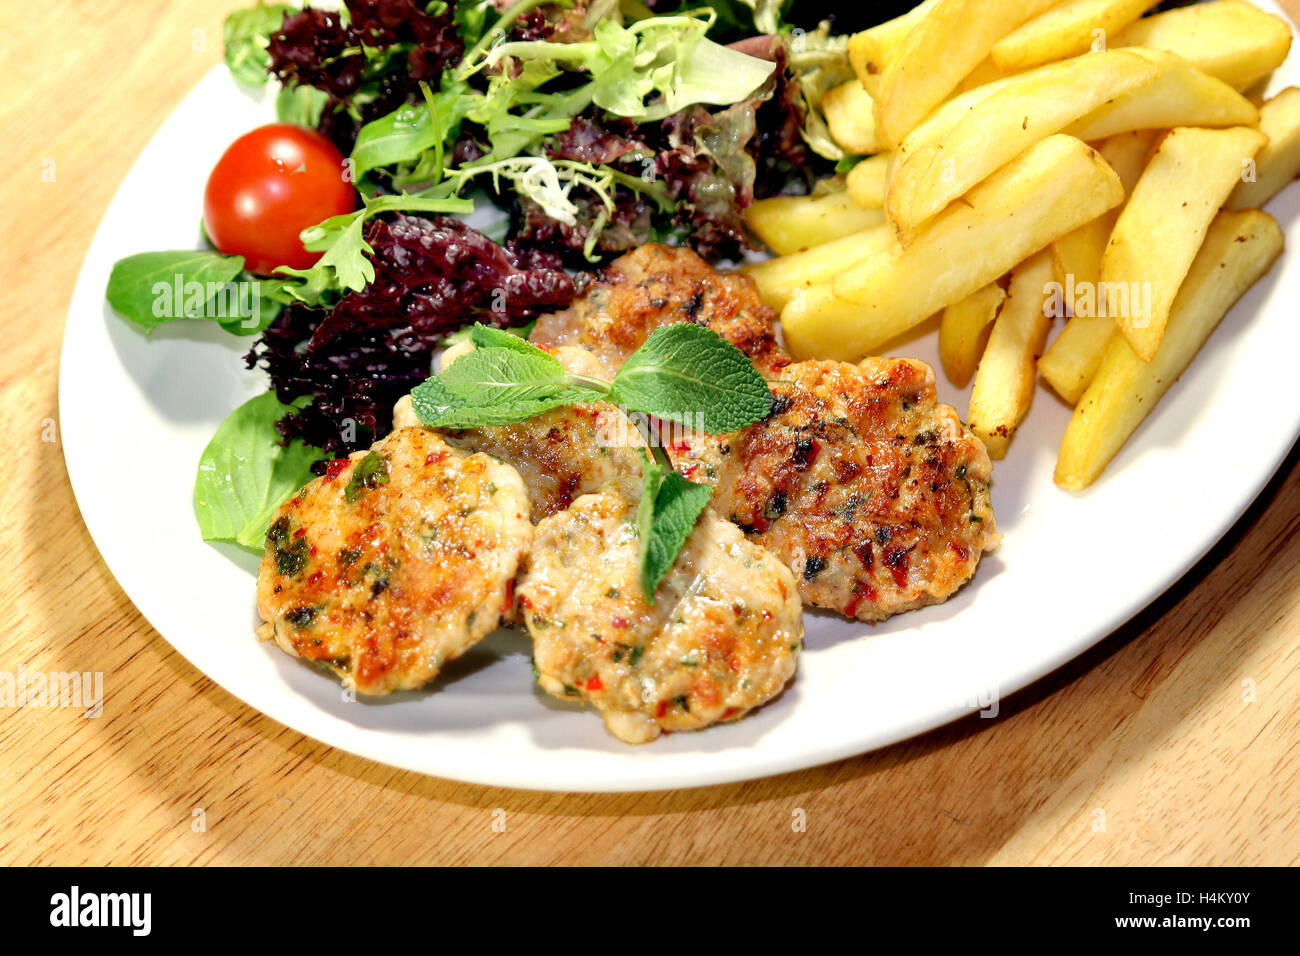 Grilled Chicken Meatball served with fries and salad Stock Photo